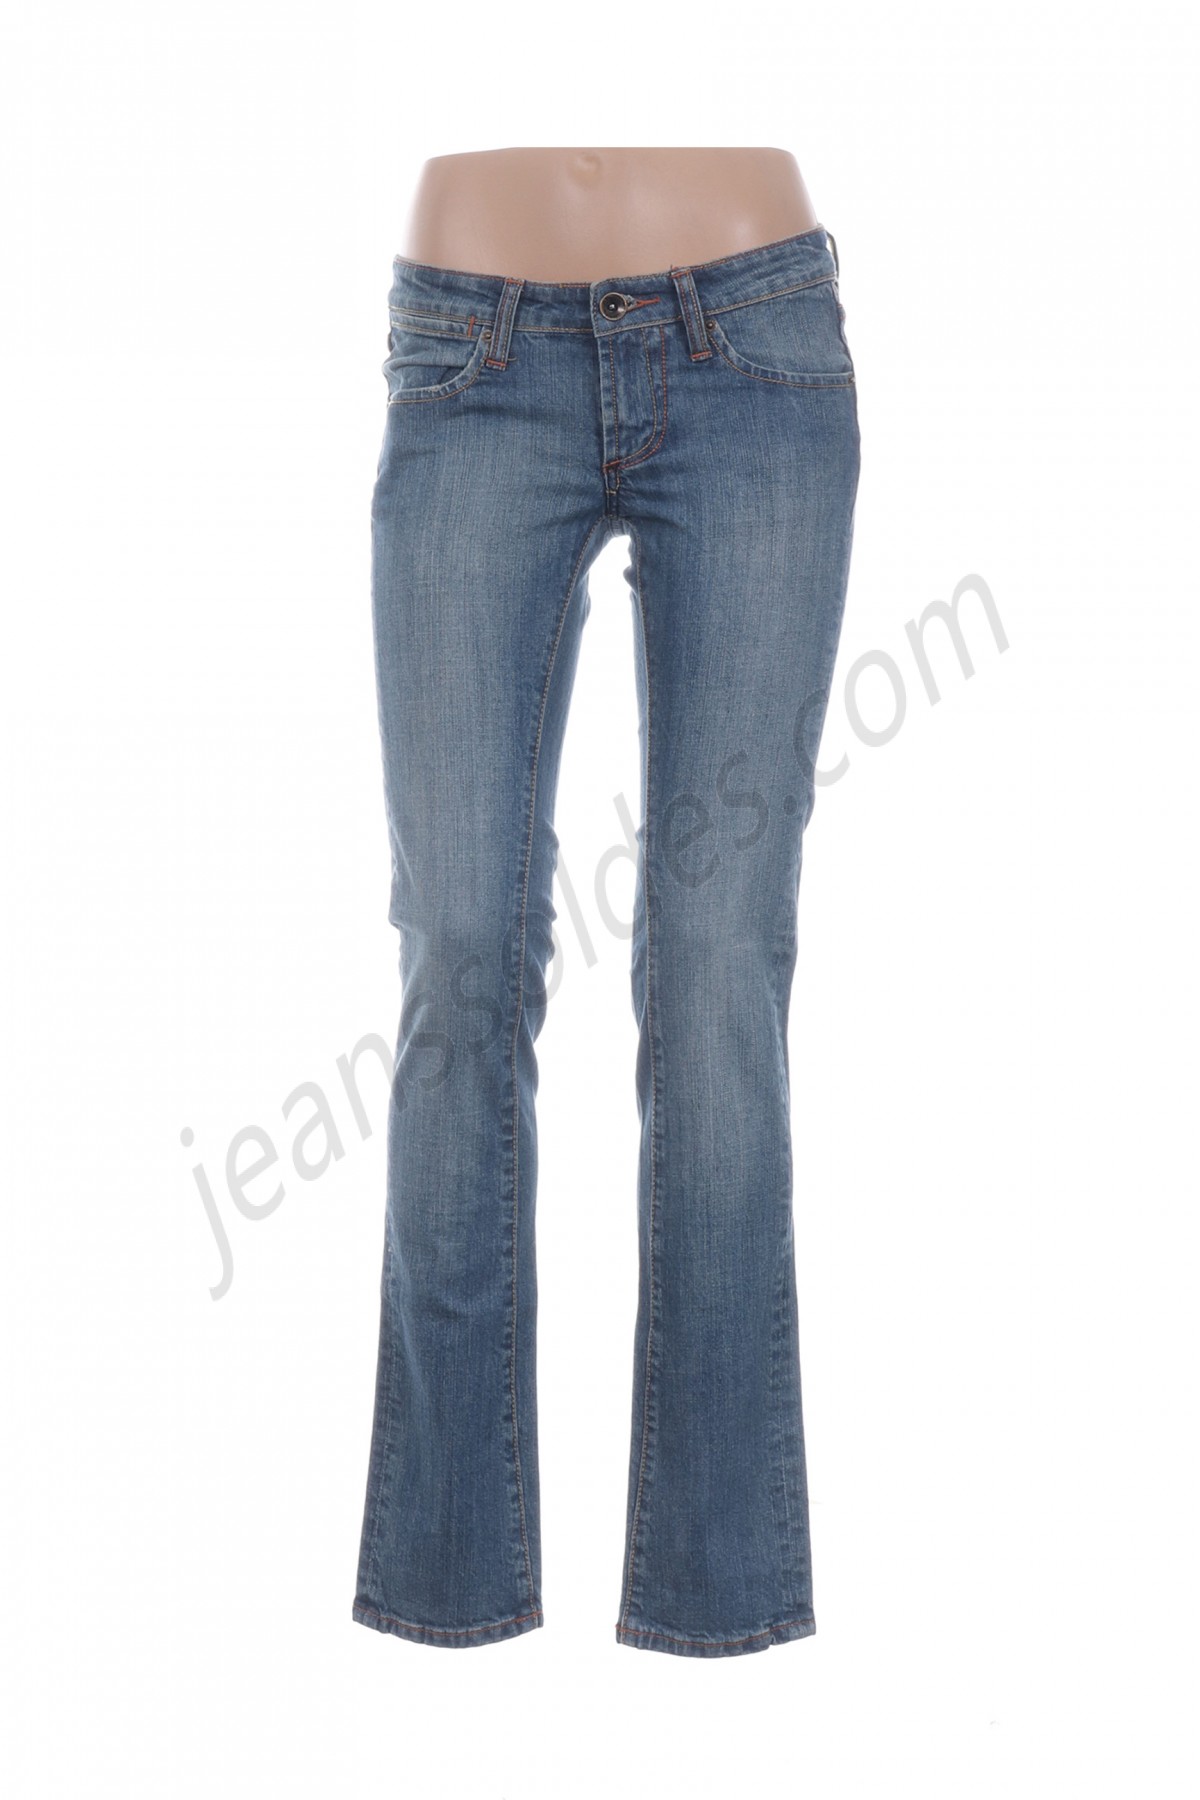 ed hardy-Jeans coupe slim prix d’amis - -0